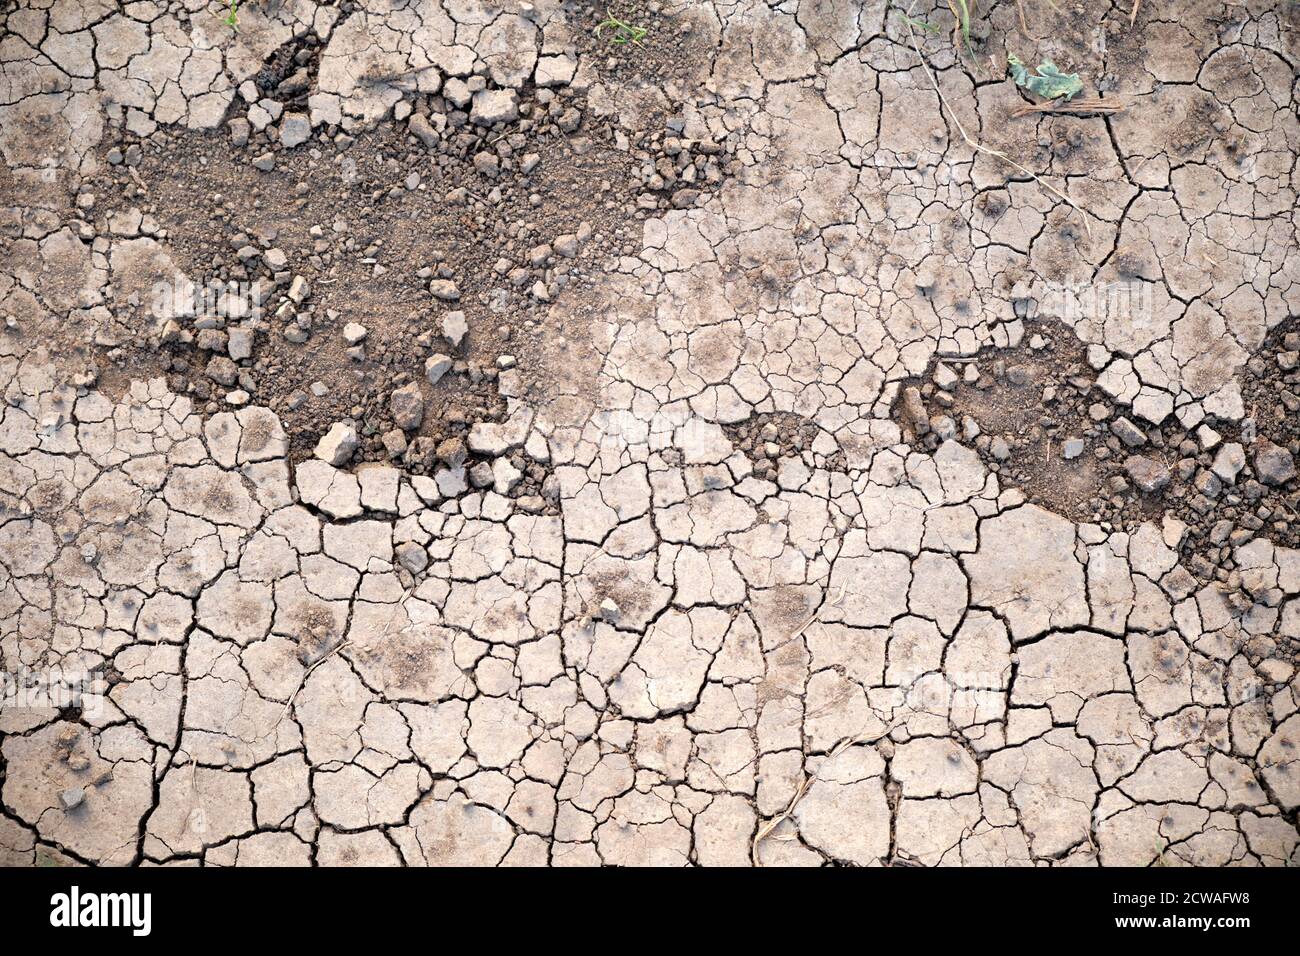 Closeup of broken dried out arid soil in Germany in September. Stock Photo